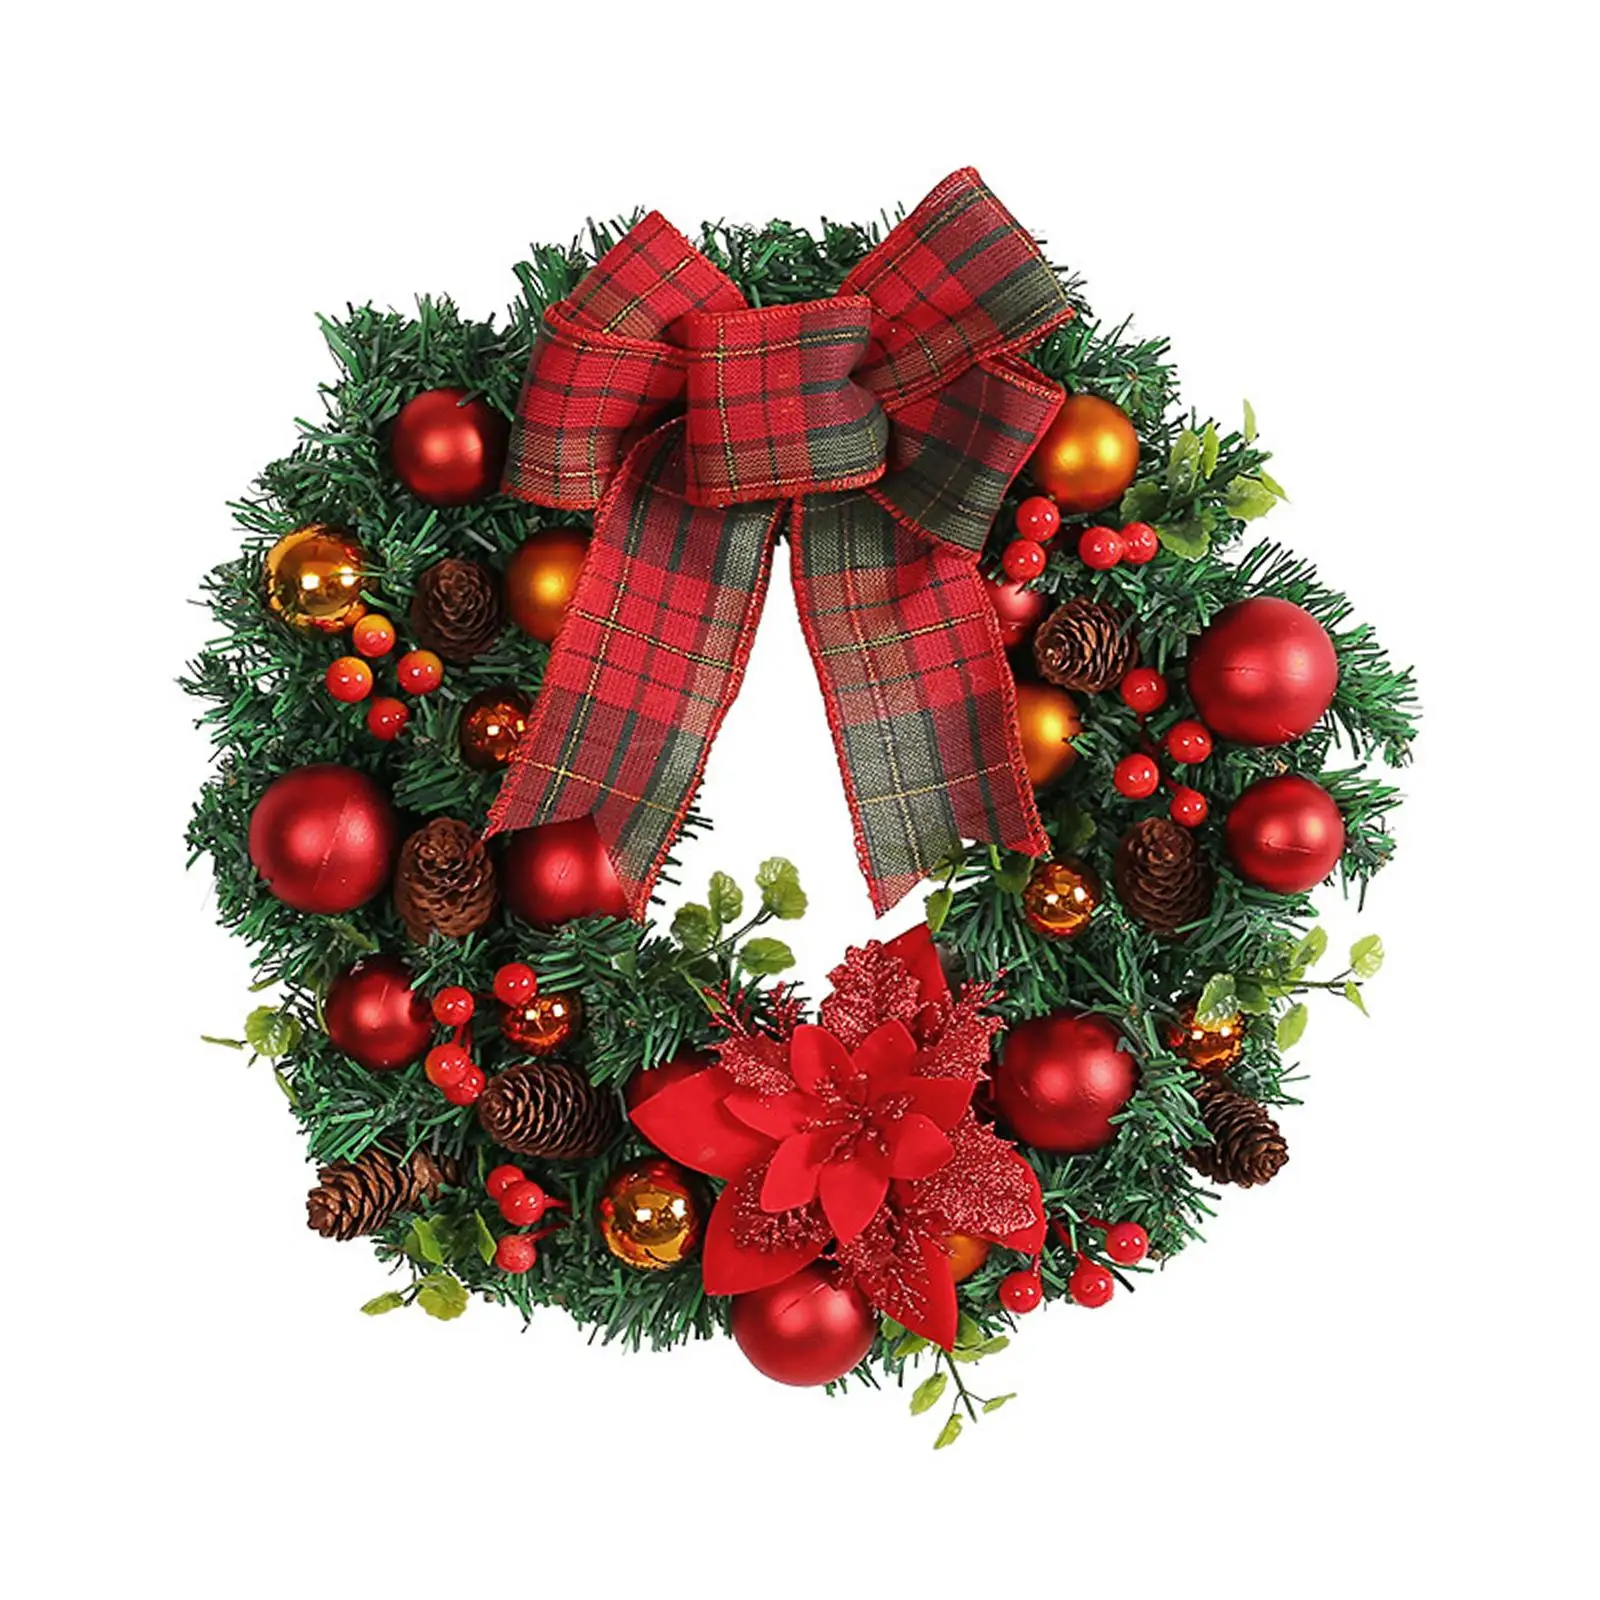 Artificial Christmas Wreath Decorations Red Berries Wreath for Front Door Holiday Garland for Window Festival Office Hotel Porch